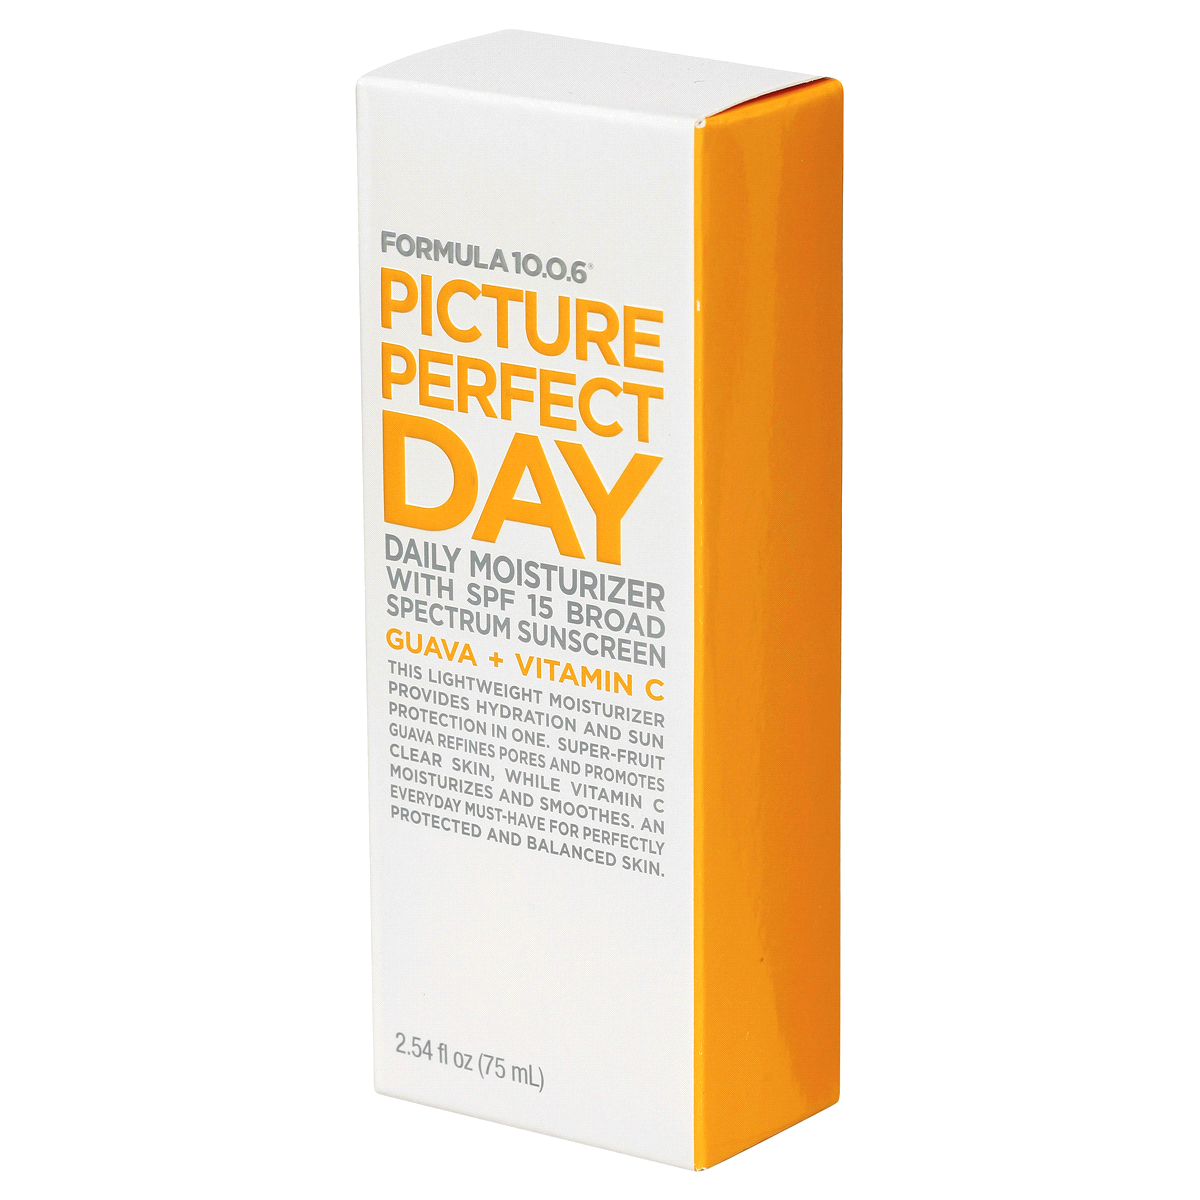 slide 2 of 3, Formula 10.0.6 Picture Perfect Day Daily Moisturizer with SPF 15 Sunscreen, Guava + Vitamin C, 2.54 fl oz